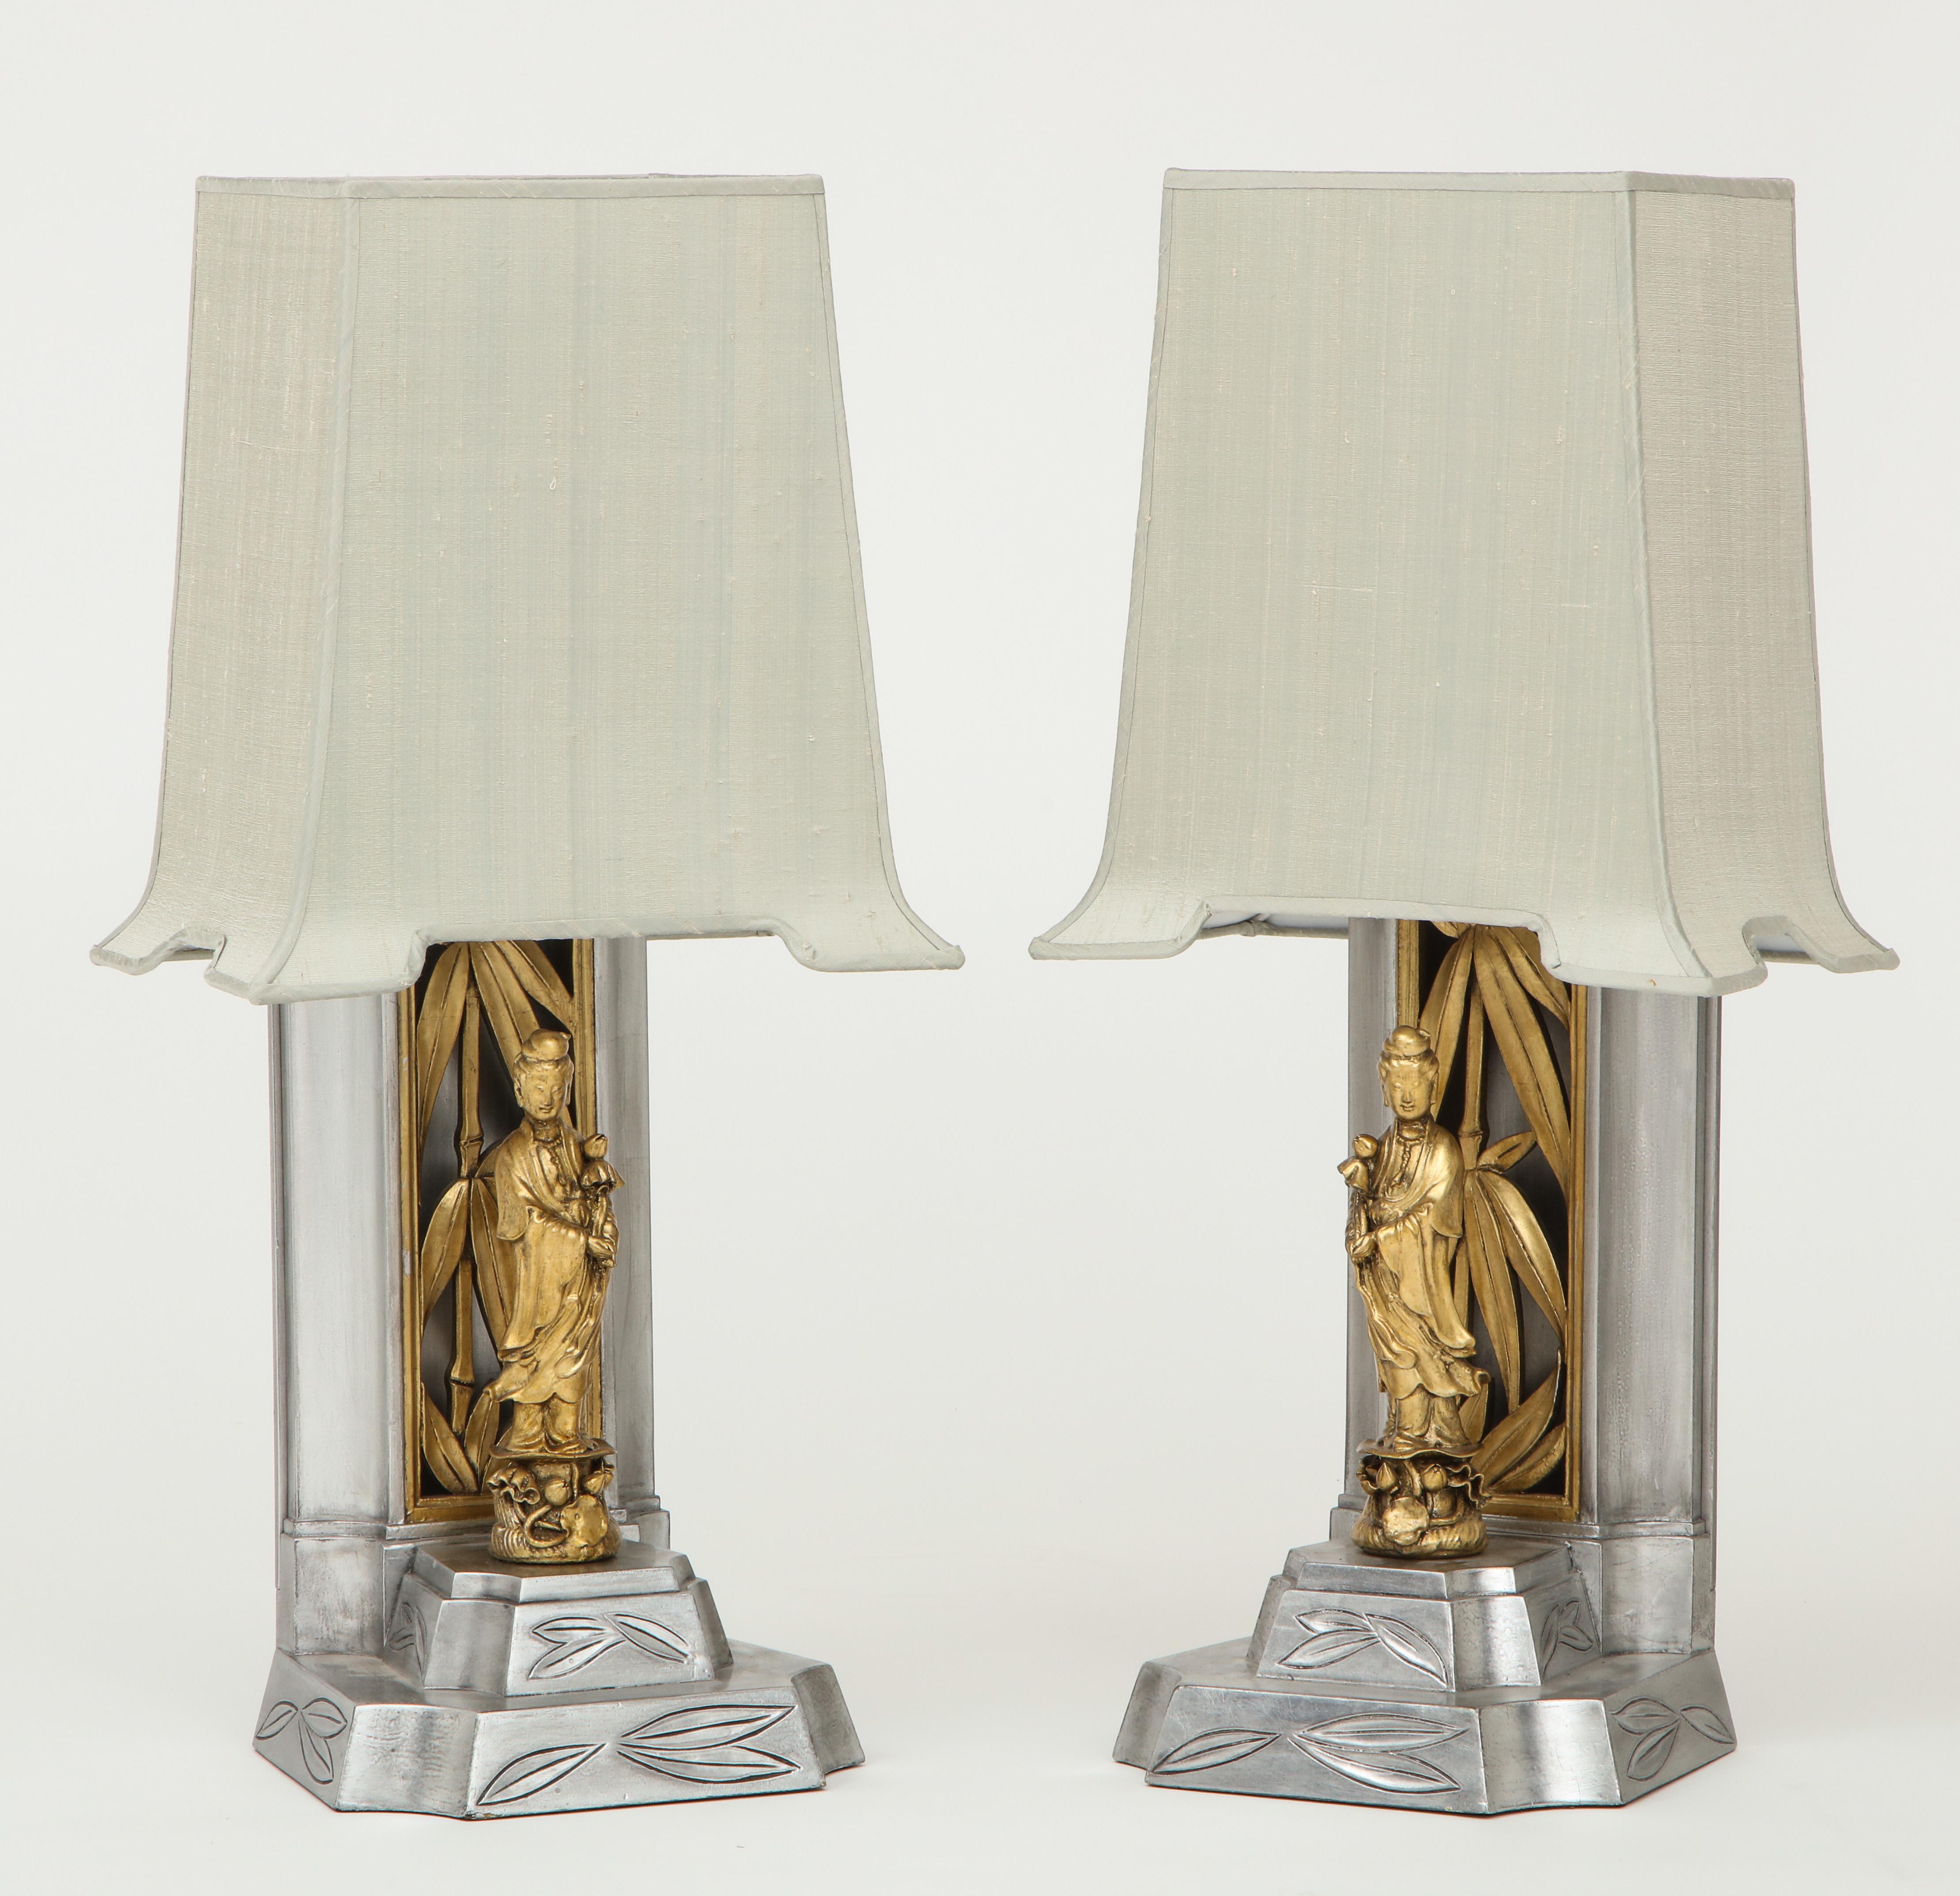 Pair of James Mont gilded lamps each having a fluted and carved silver leaf base with contrasting gold leaf stylized bamboo leaves, and a gold gilded goddess figure. Original shades have been recovered in a silver shantung silk. Rewired for use in